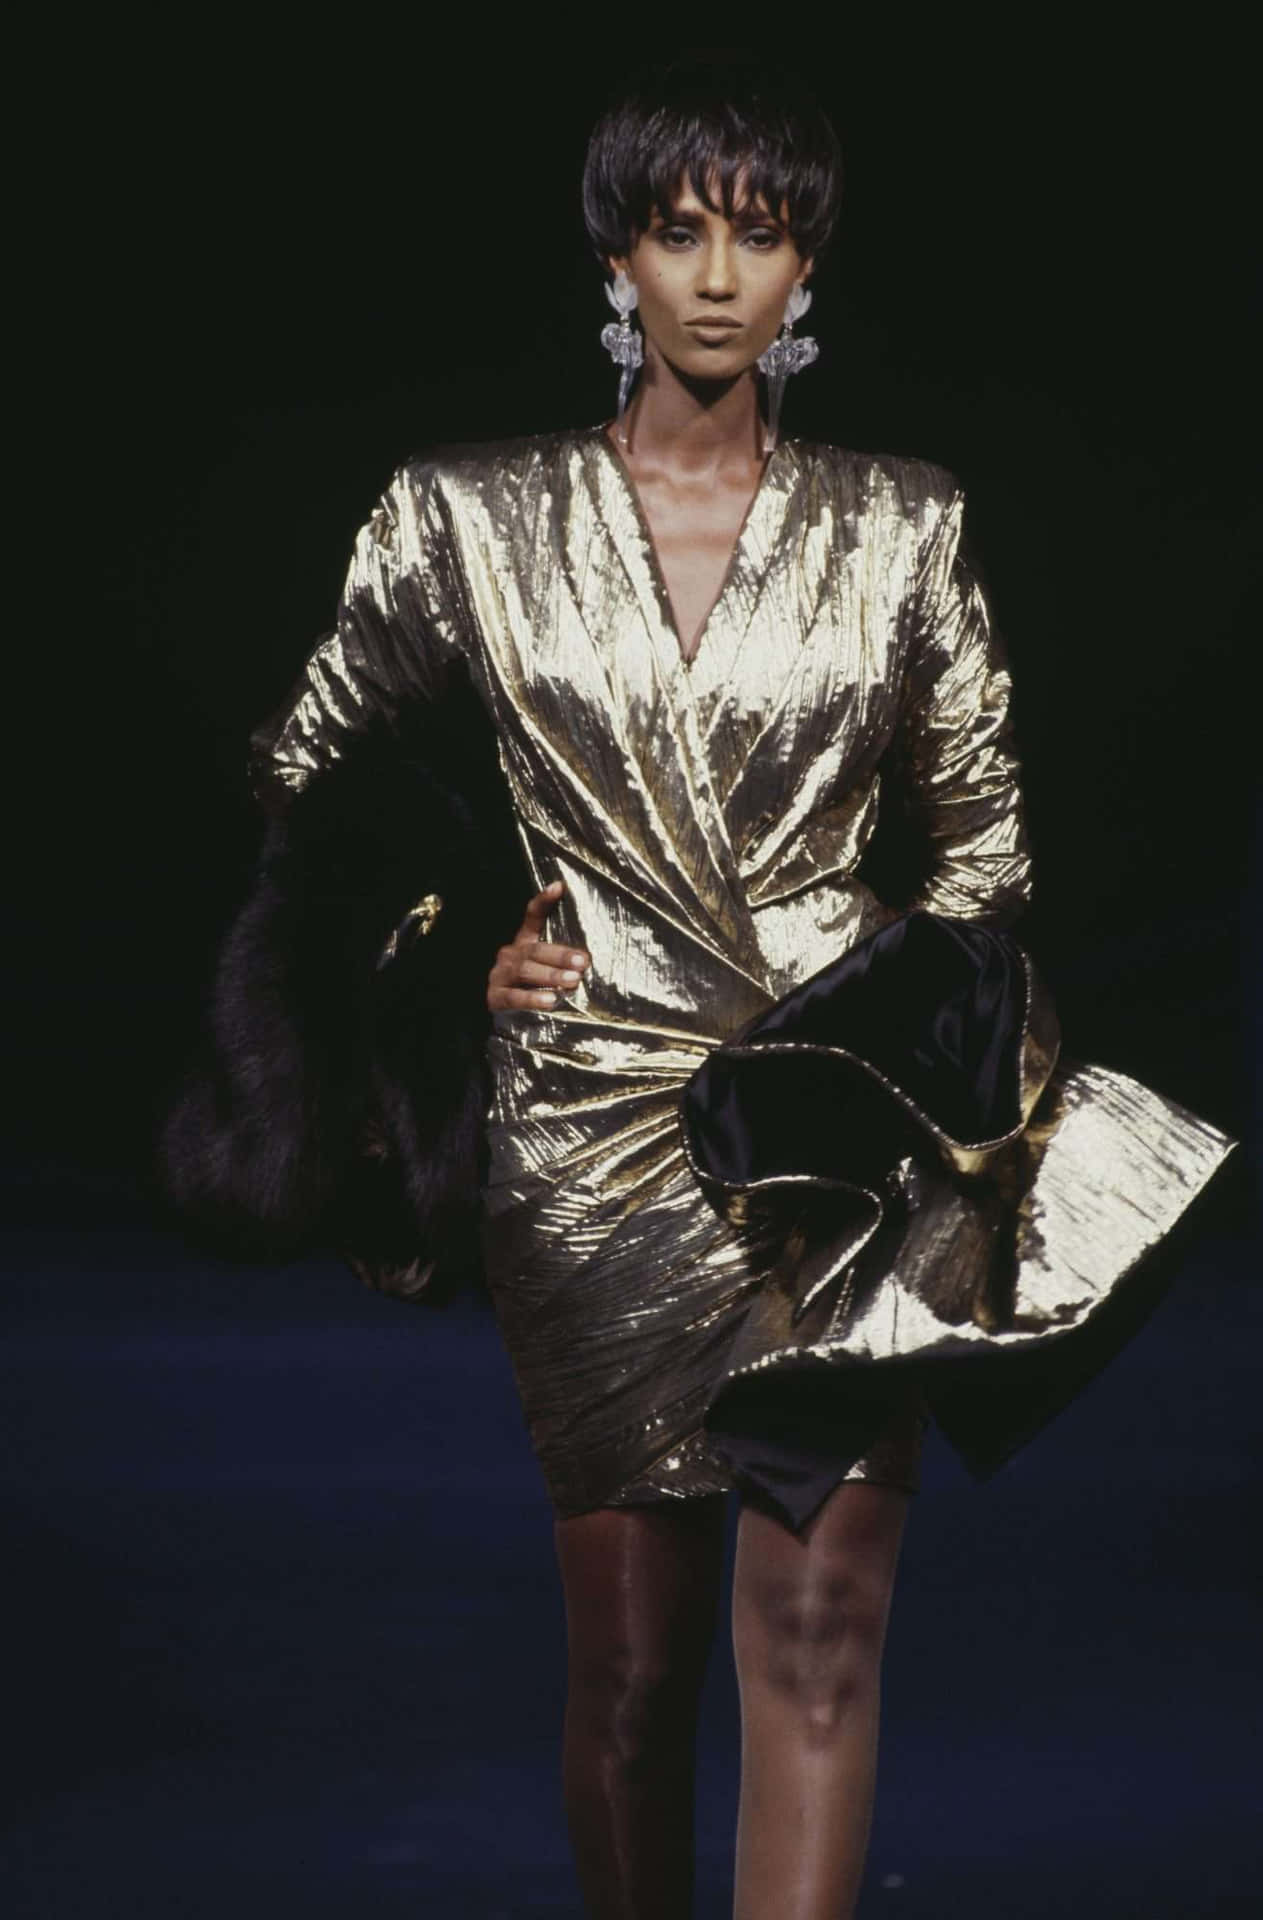 Download A Woman In A Gold Dress Walking Down The Runway | Wallpapers.com